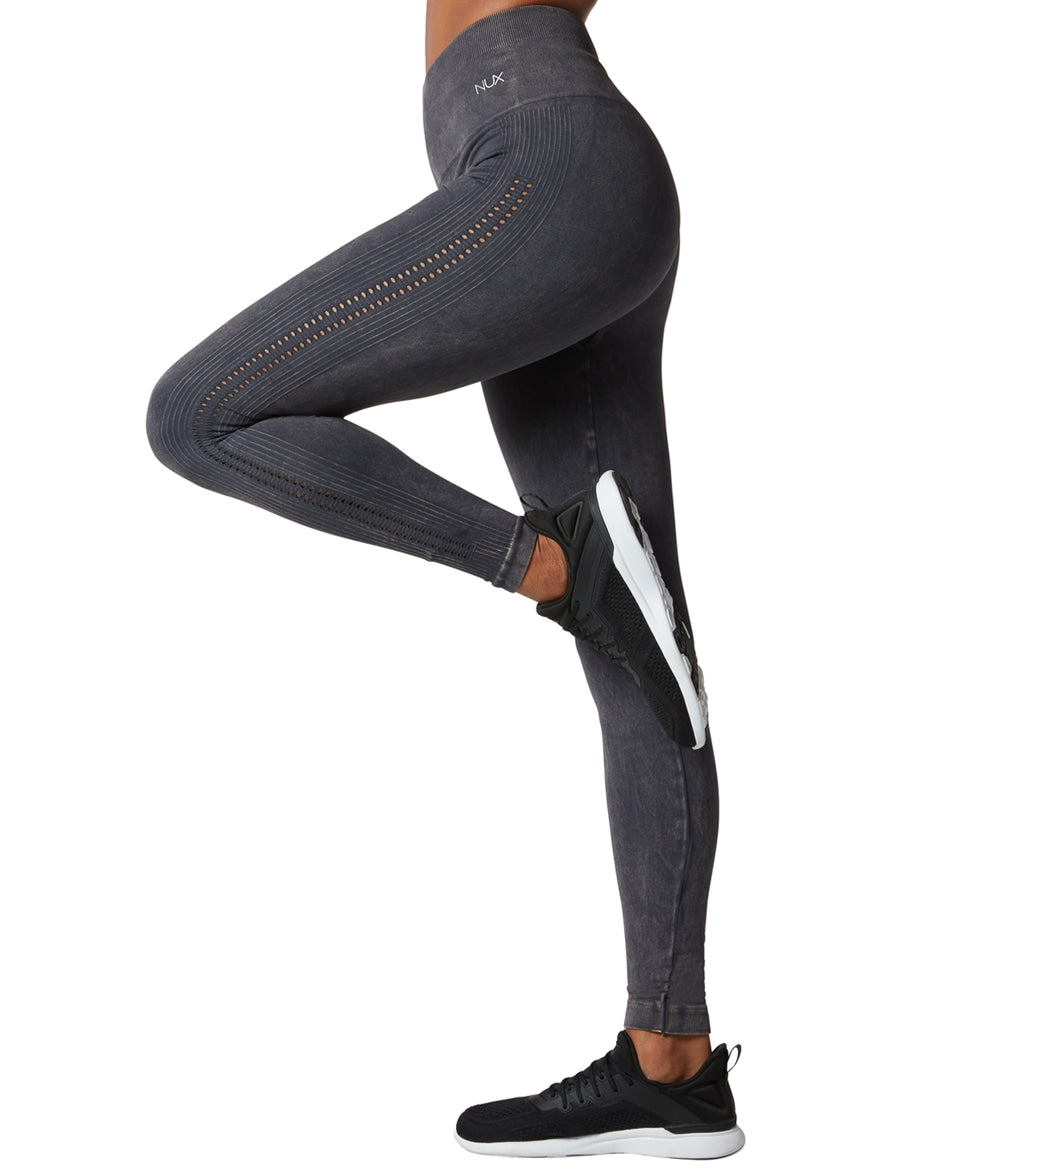 NUX One by One Legging in Black Mineral Wash